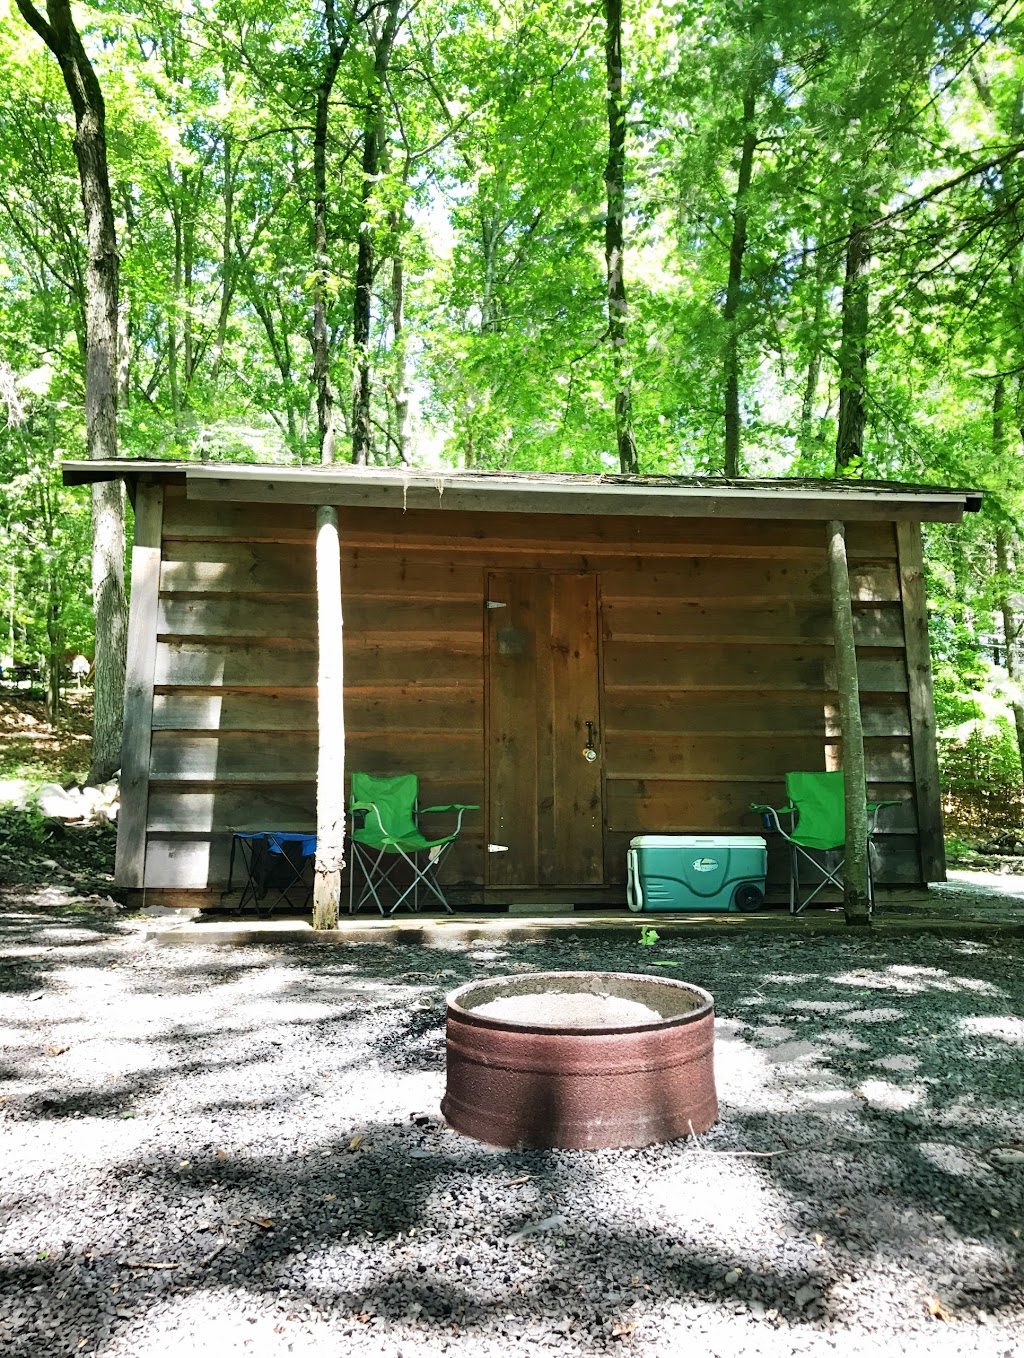 Cranberry Run Campground | 188 Campground Rd, East Stroudsburg, PA 18301 | Phone: (570) 421-1462